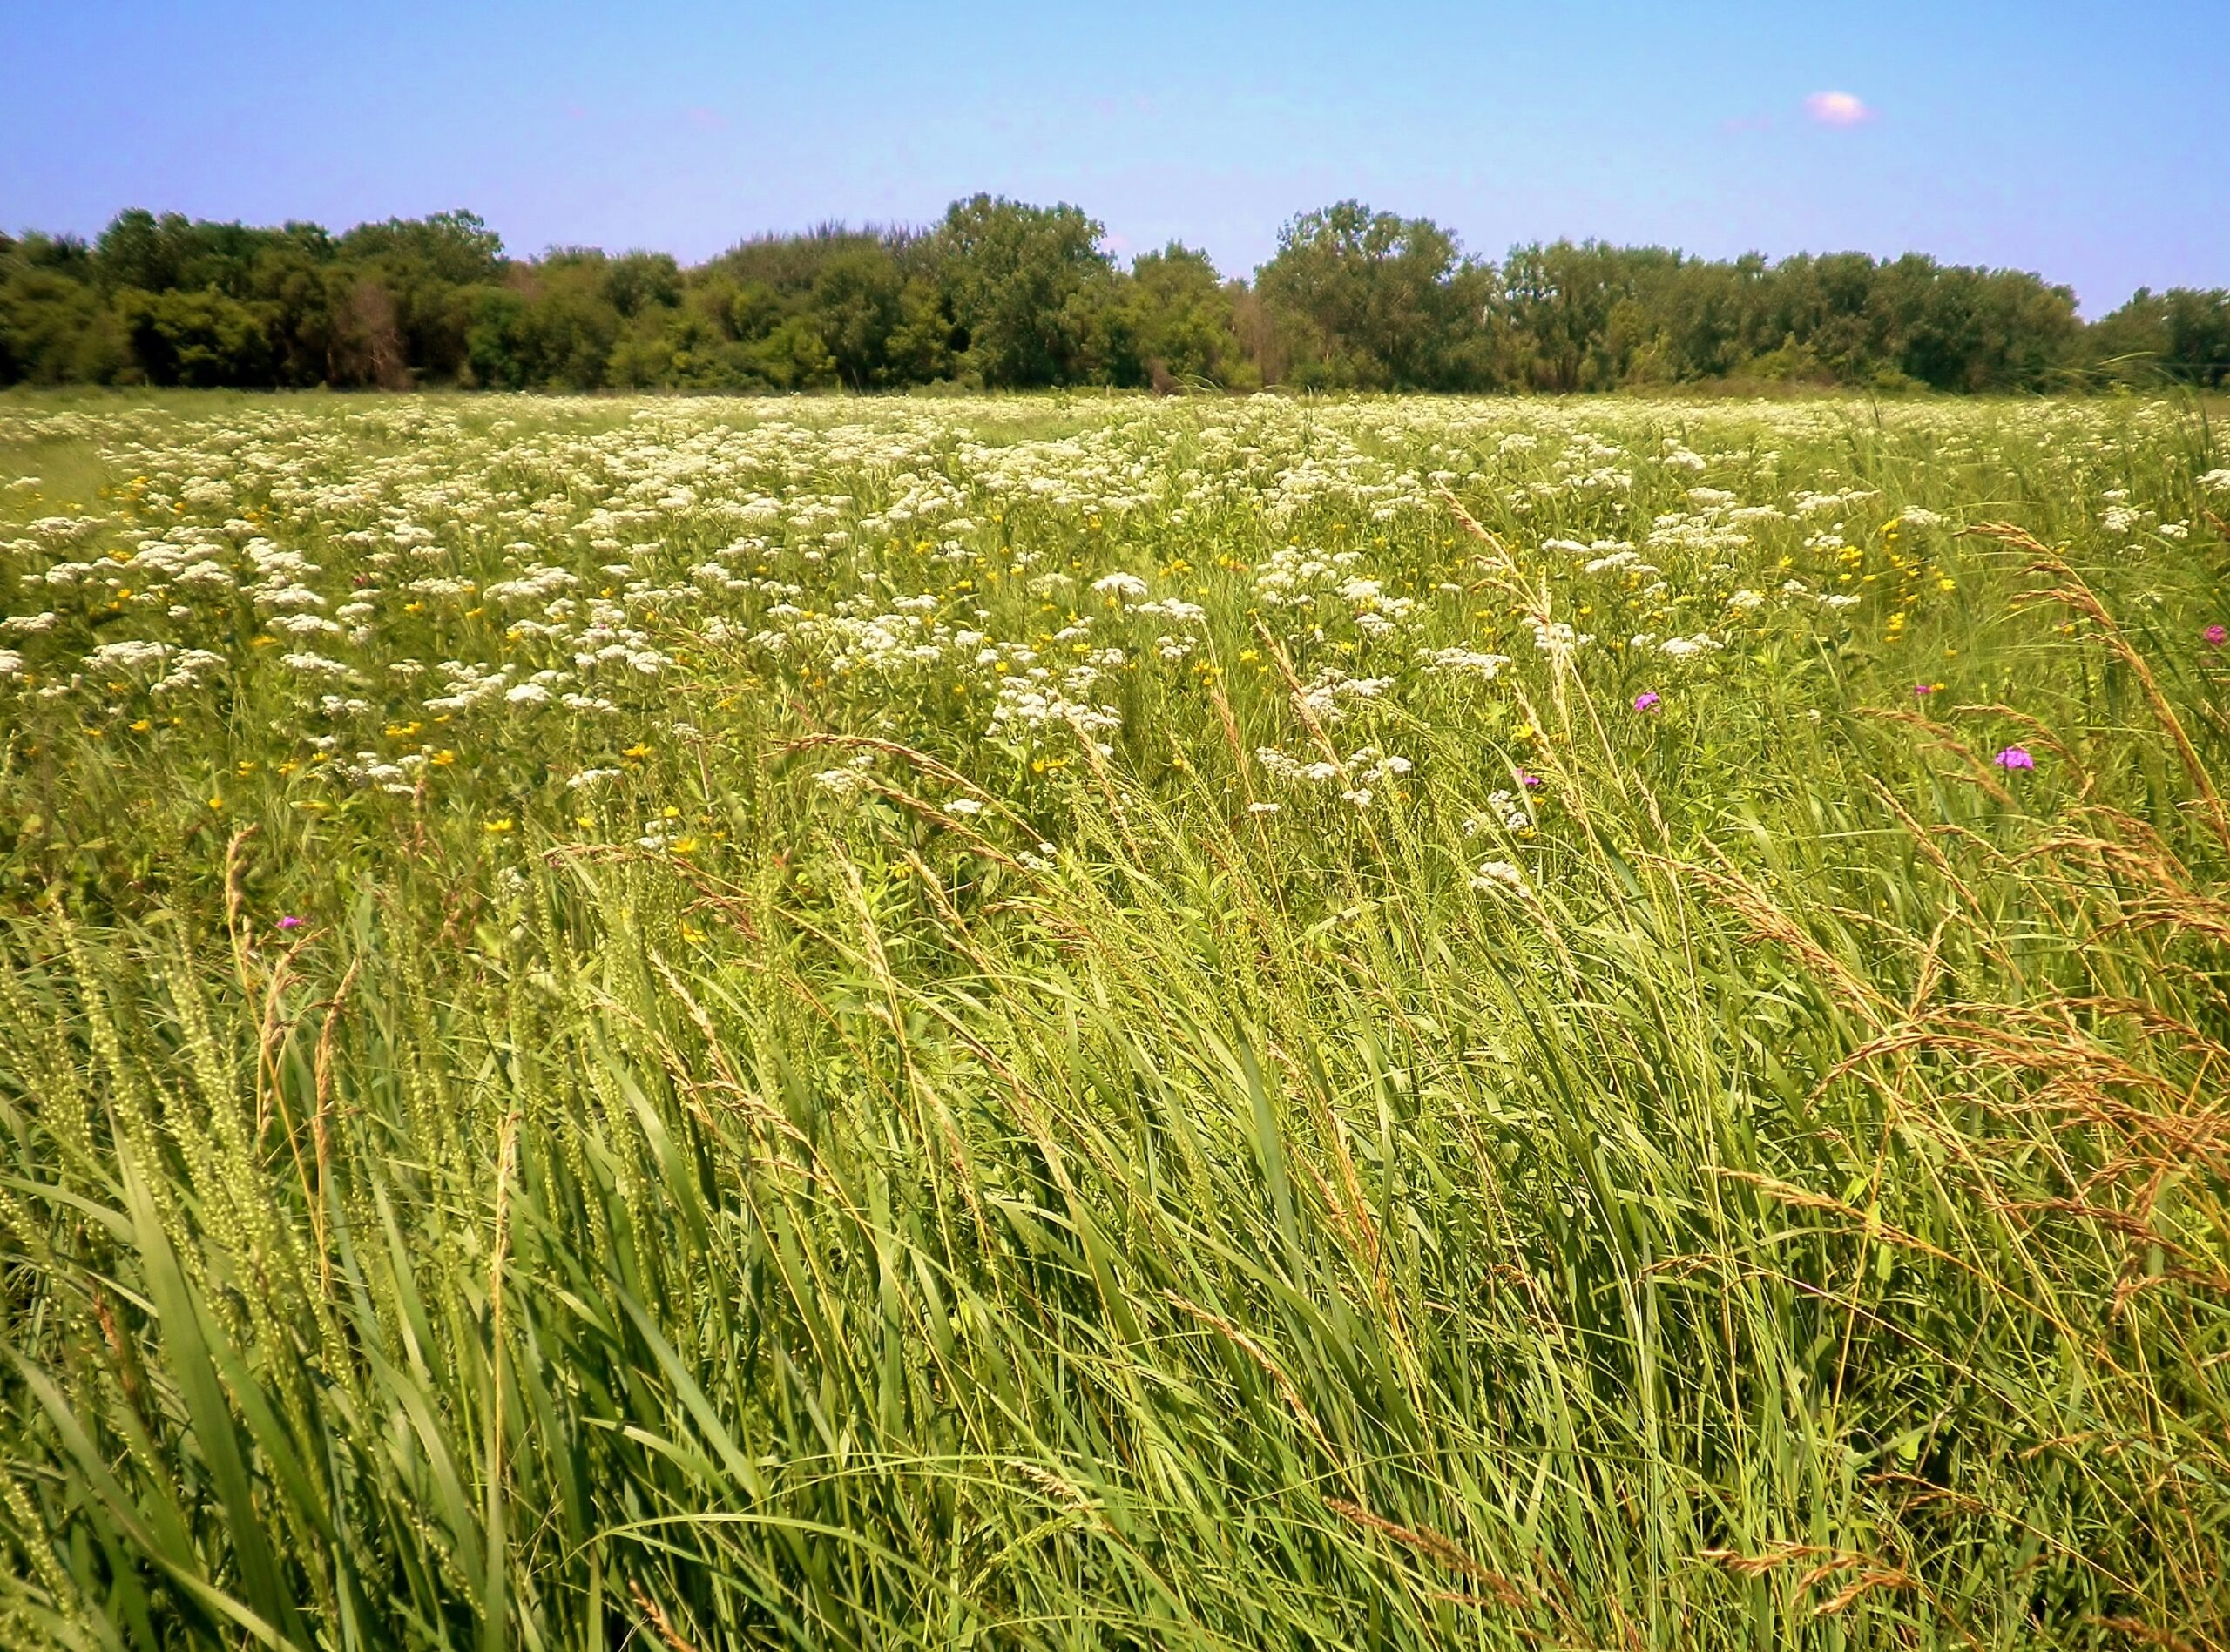 Photograph of Gensburg-Markham Prairie in Illinois, U.S.A. The photo shows field field of mixed grasses and broadleaved plants, with trees on the horizon.